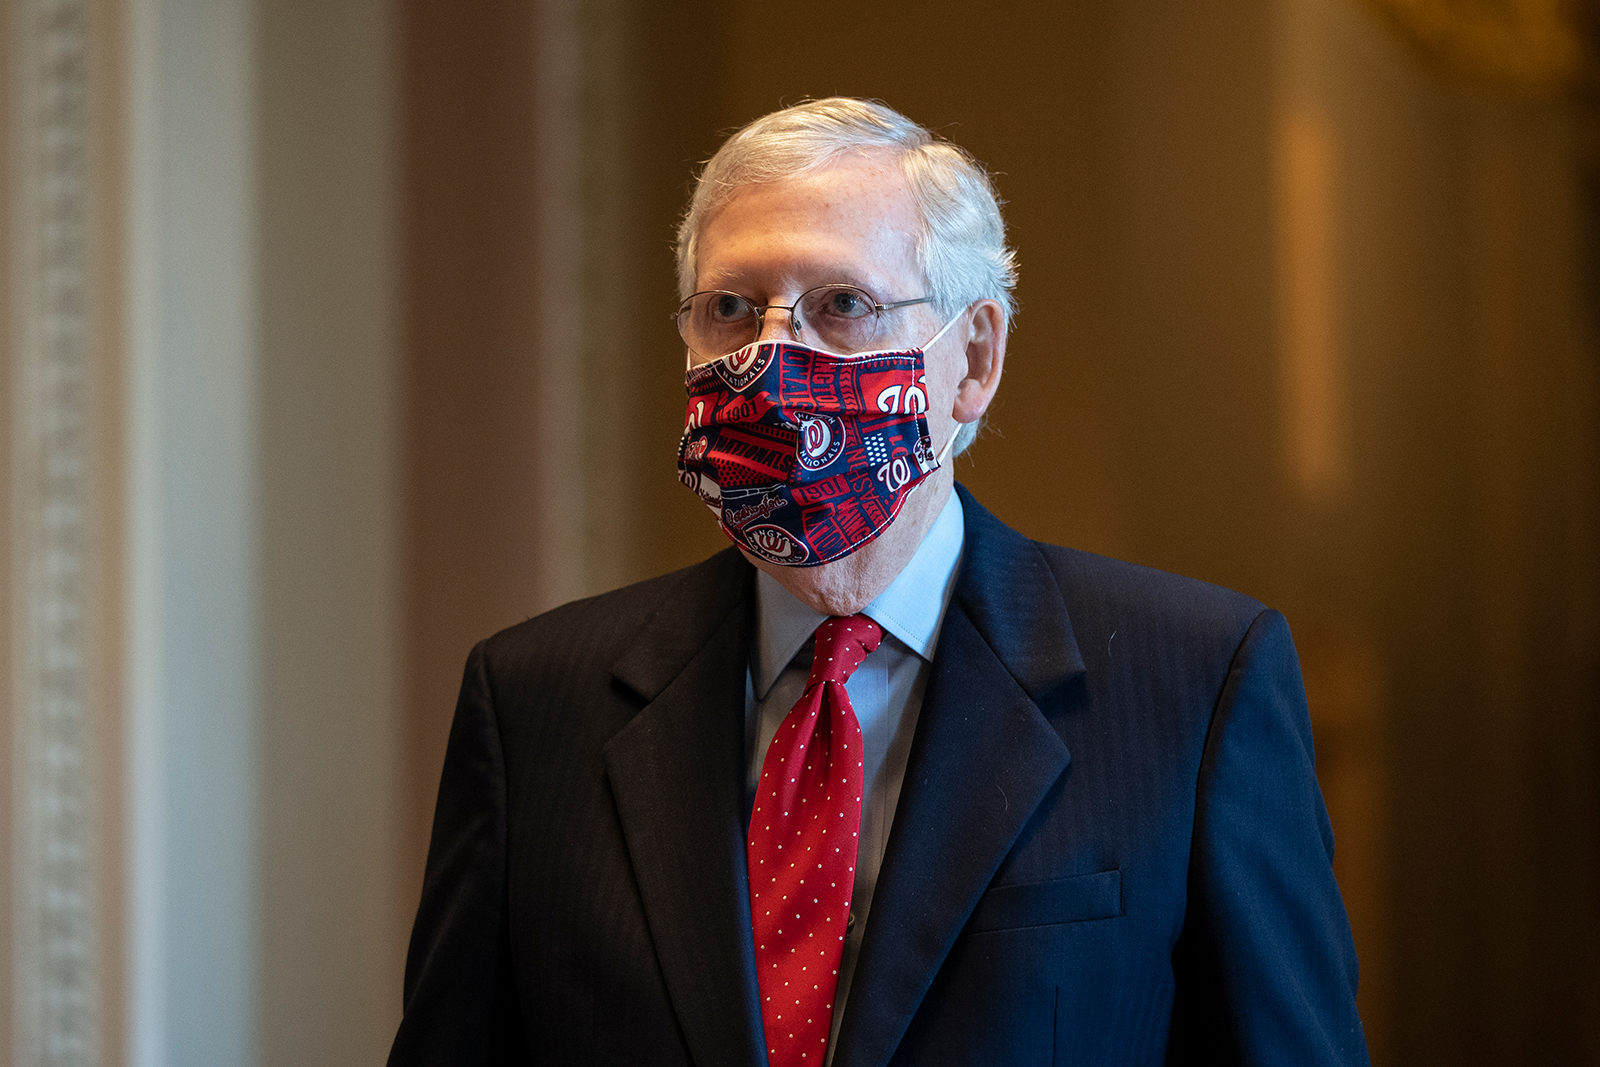 Senate Majority Leader Mitch McConnell walks to the Senate floor at the U.S. Capitol on July 30 in Washington.